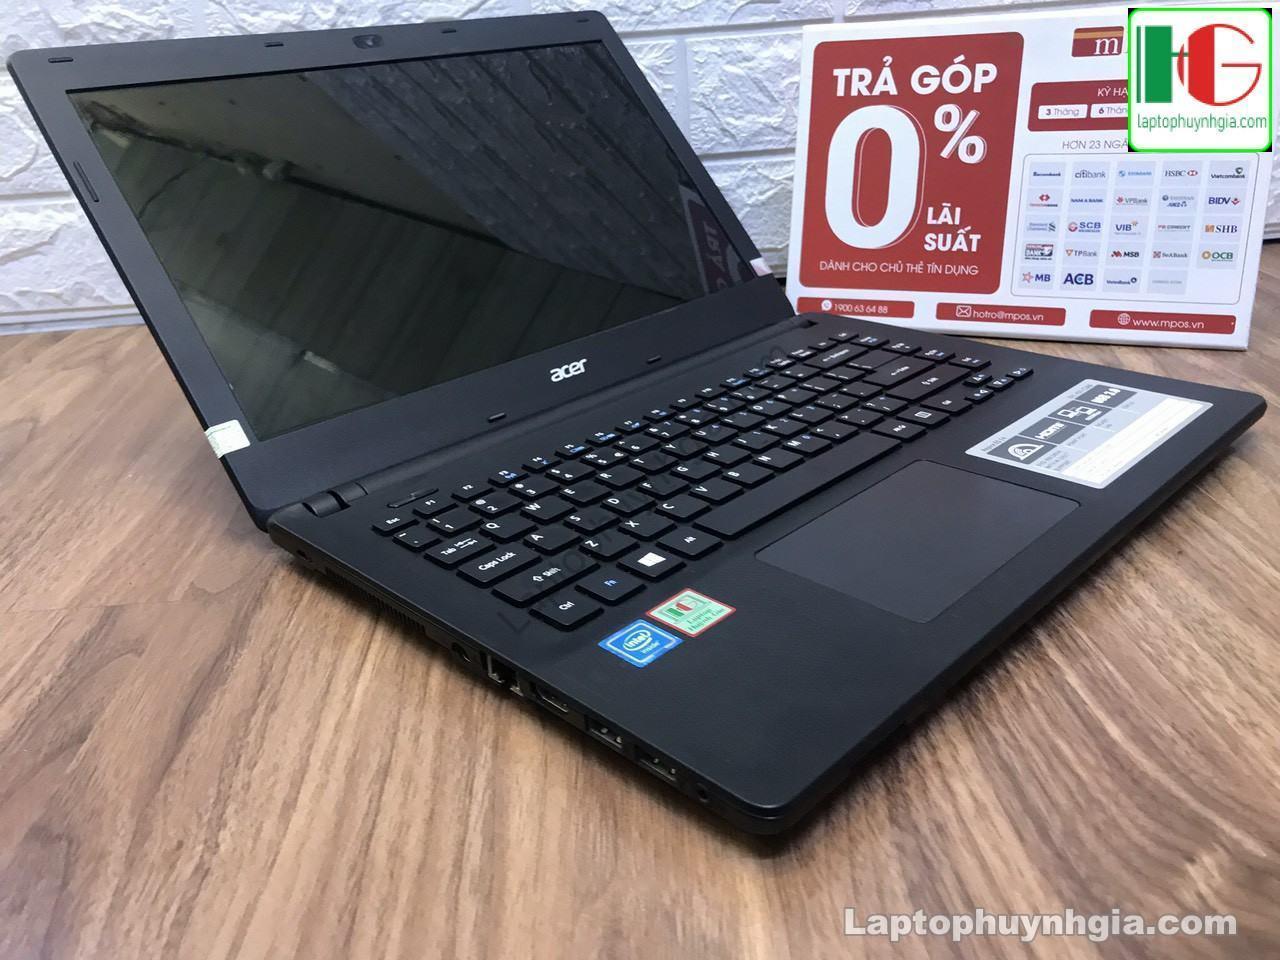 Acer Es1 N3060 4g 500g Lcd 14 Laptopcubinhduong.vn 4